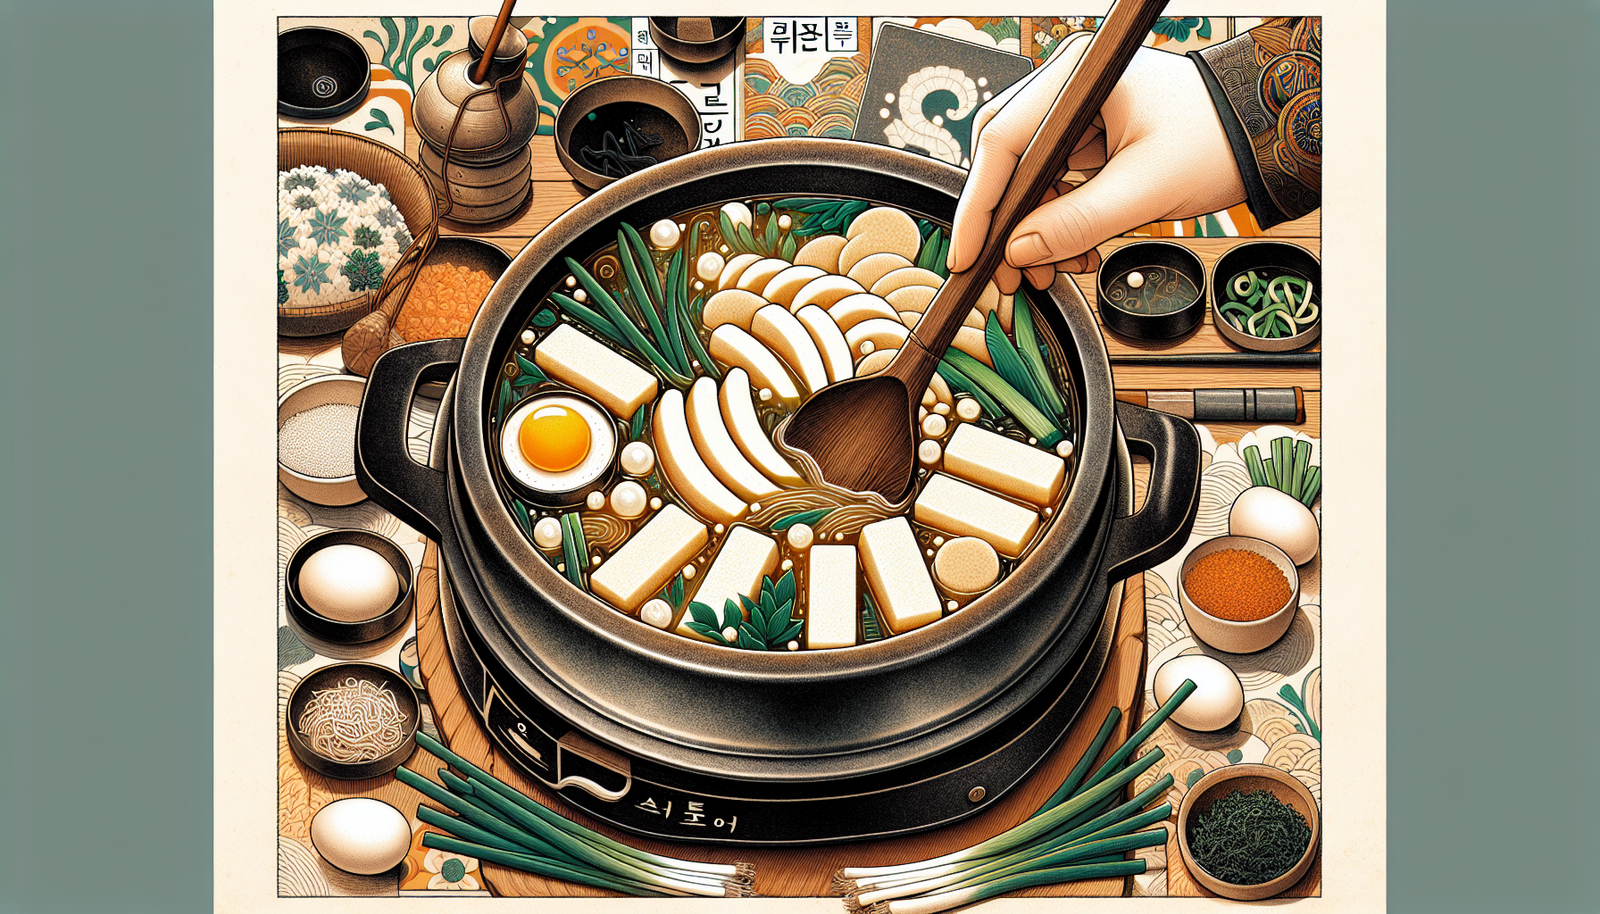 Can You Share Insights Into The Cultural Significance Of The Korean New Years Dish, Tteokguk?